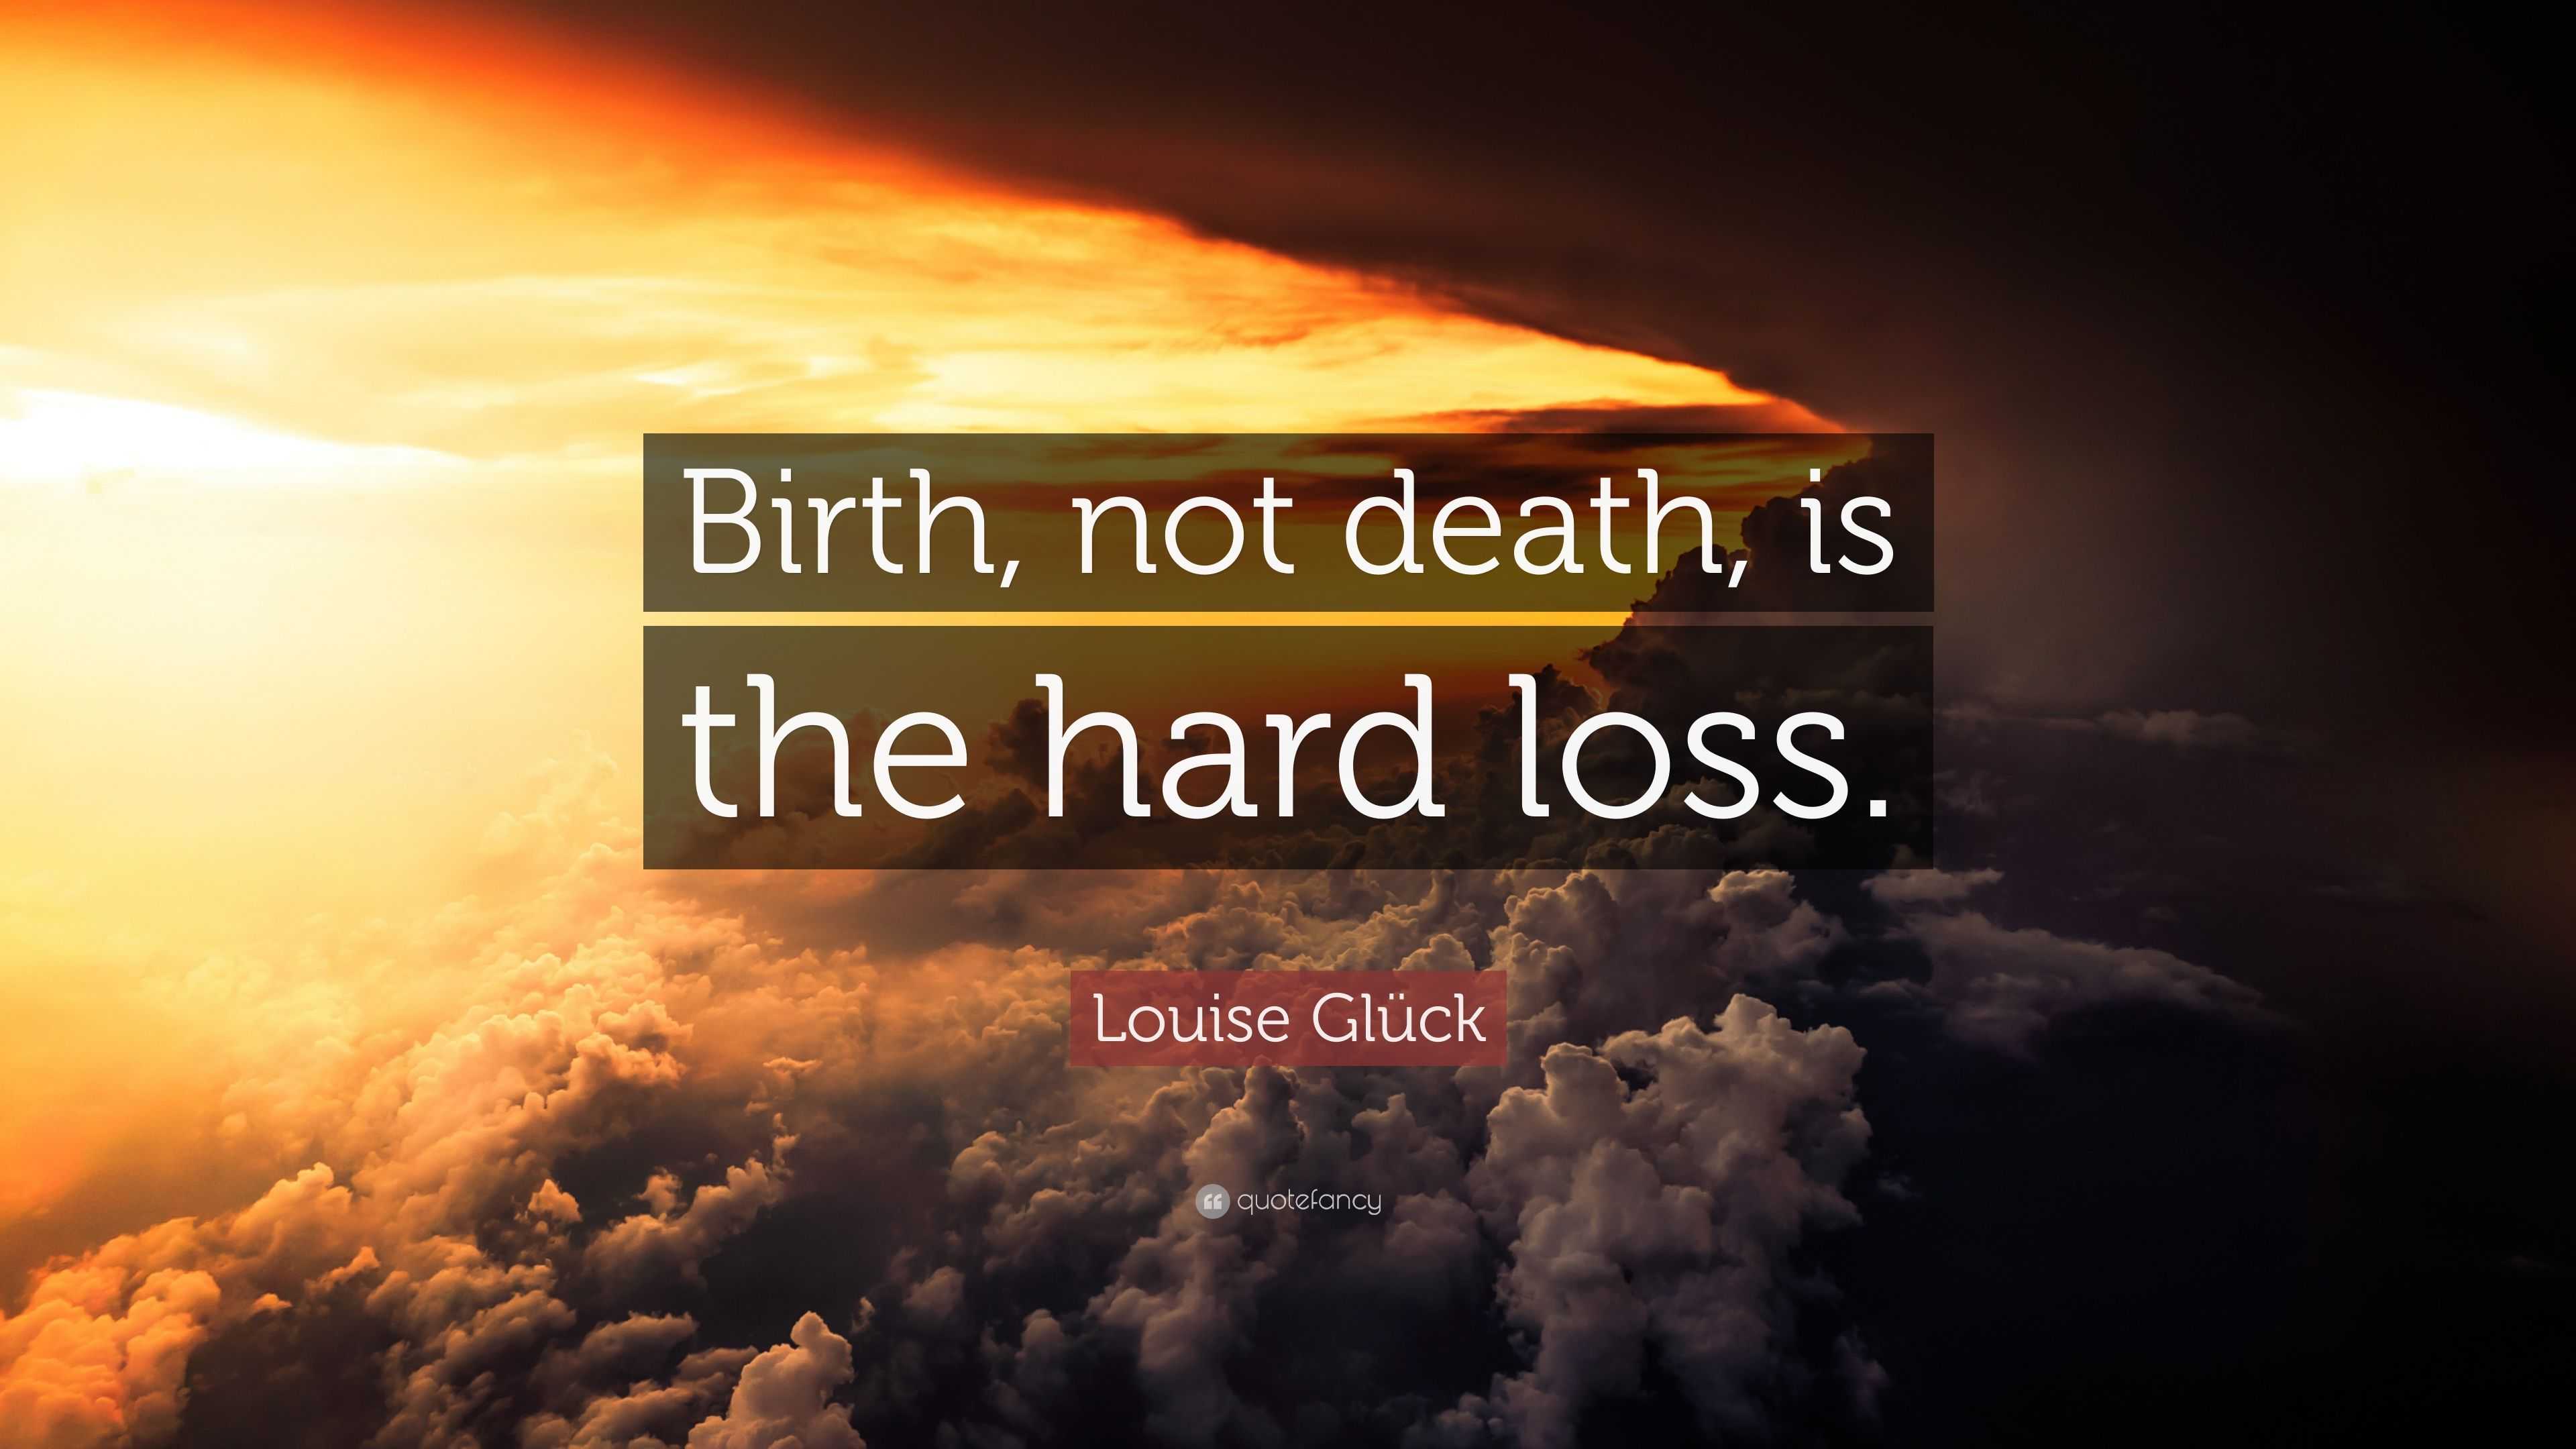 Louise Glück Quote: “Birth, not death, is the hard loss.” (7 wallpapers) - Quotefancy